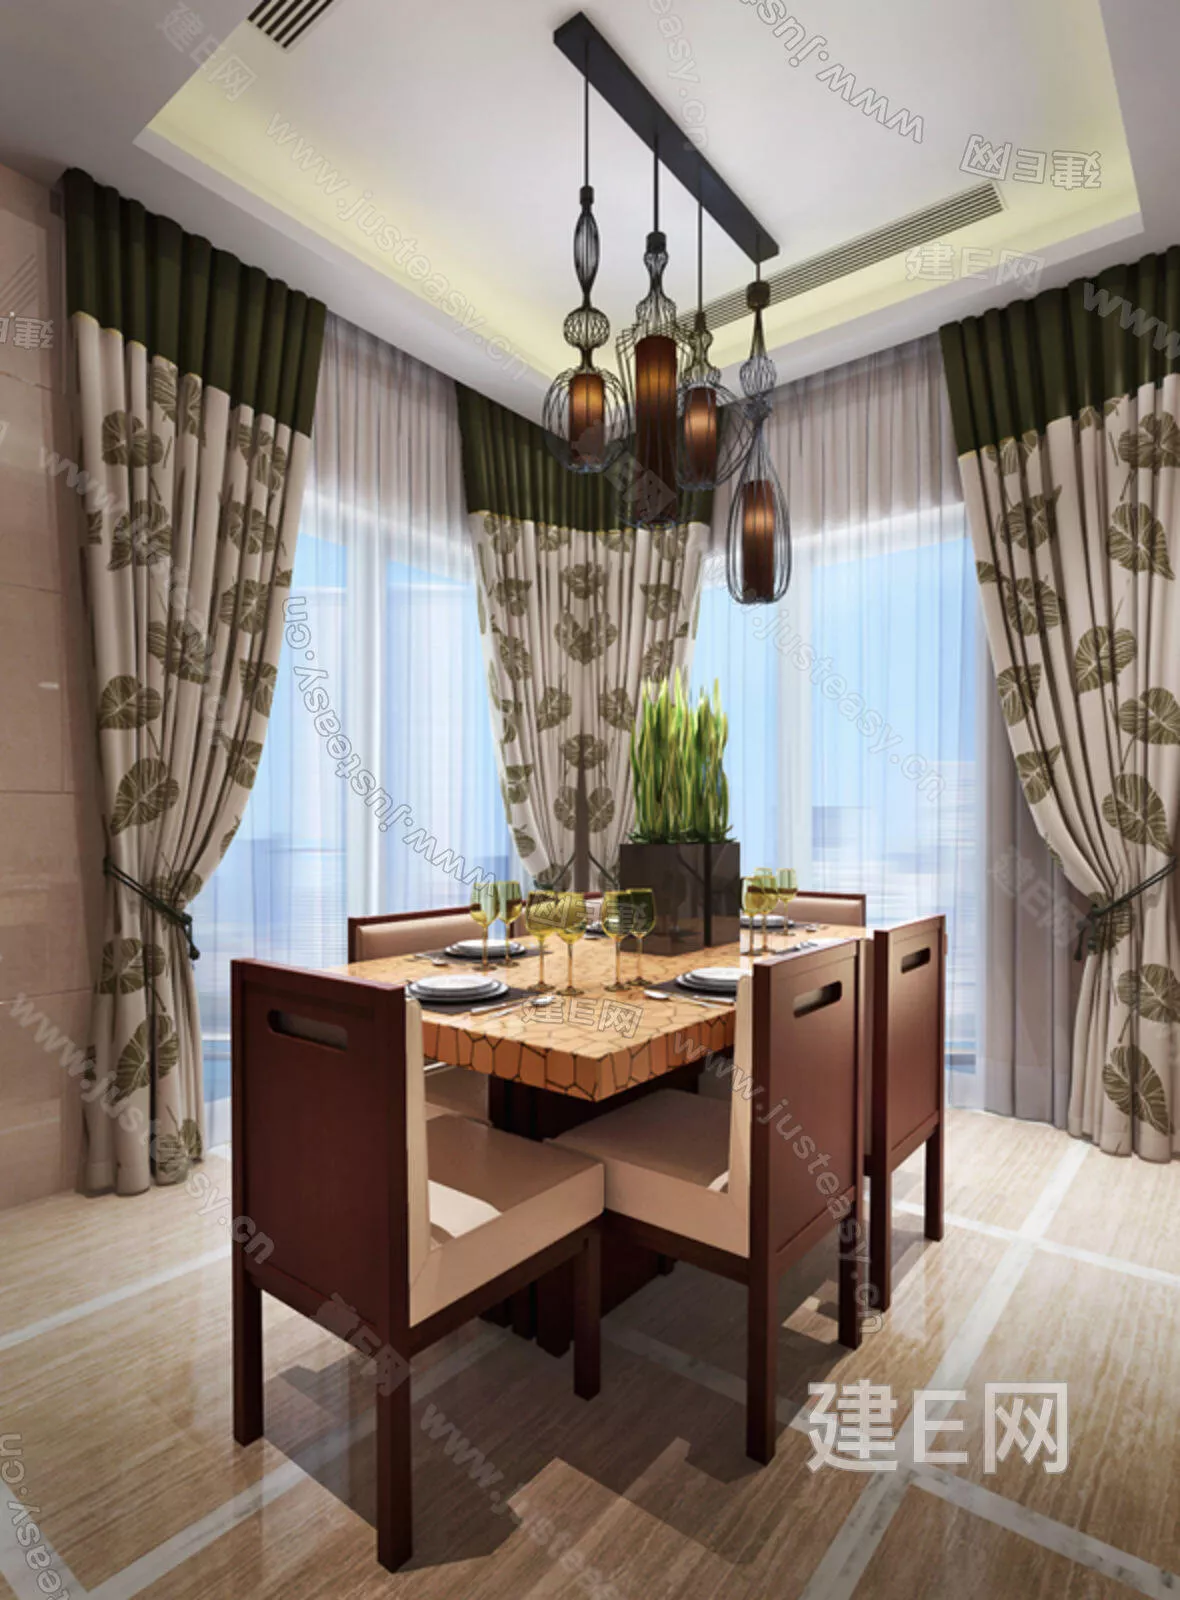 CHINESE DINING TABLE SET - SKETCHUP 3D MODEL - ENSCAPE - 112872810